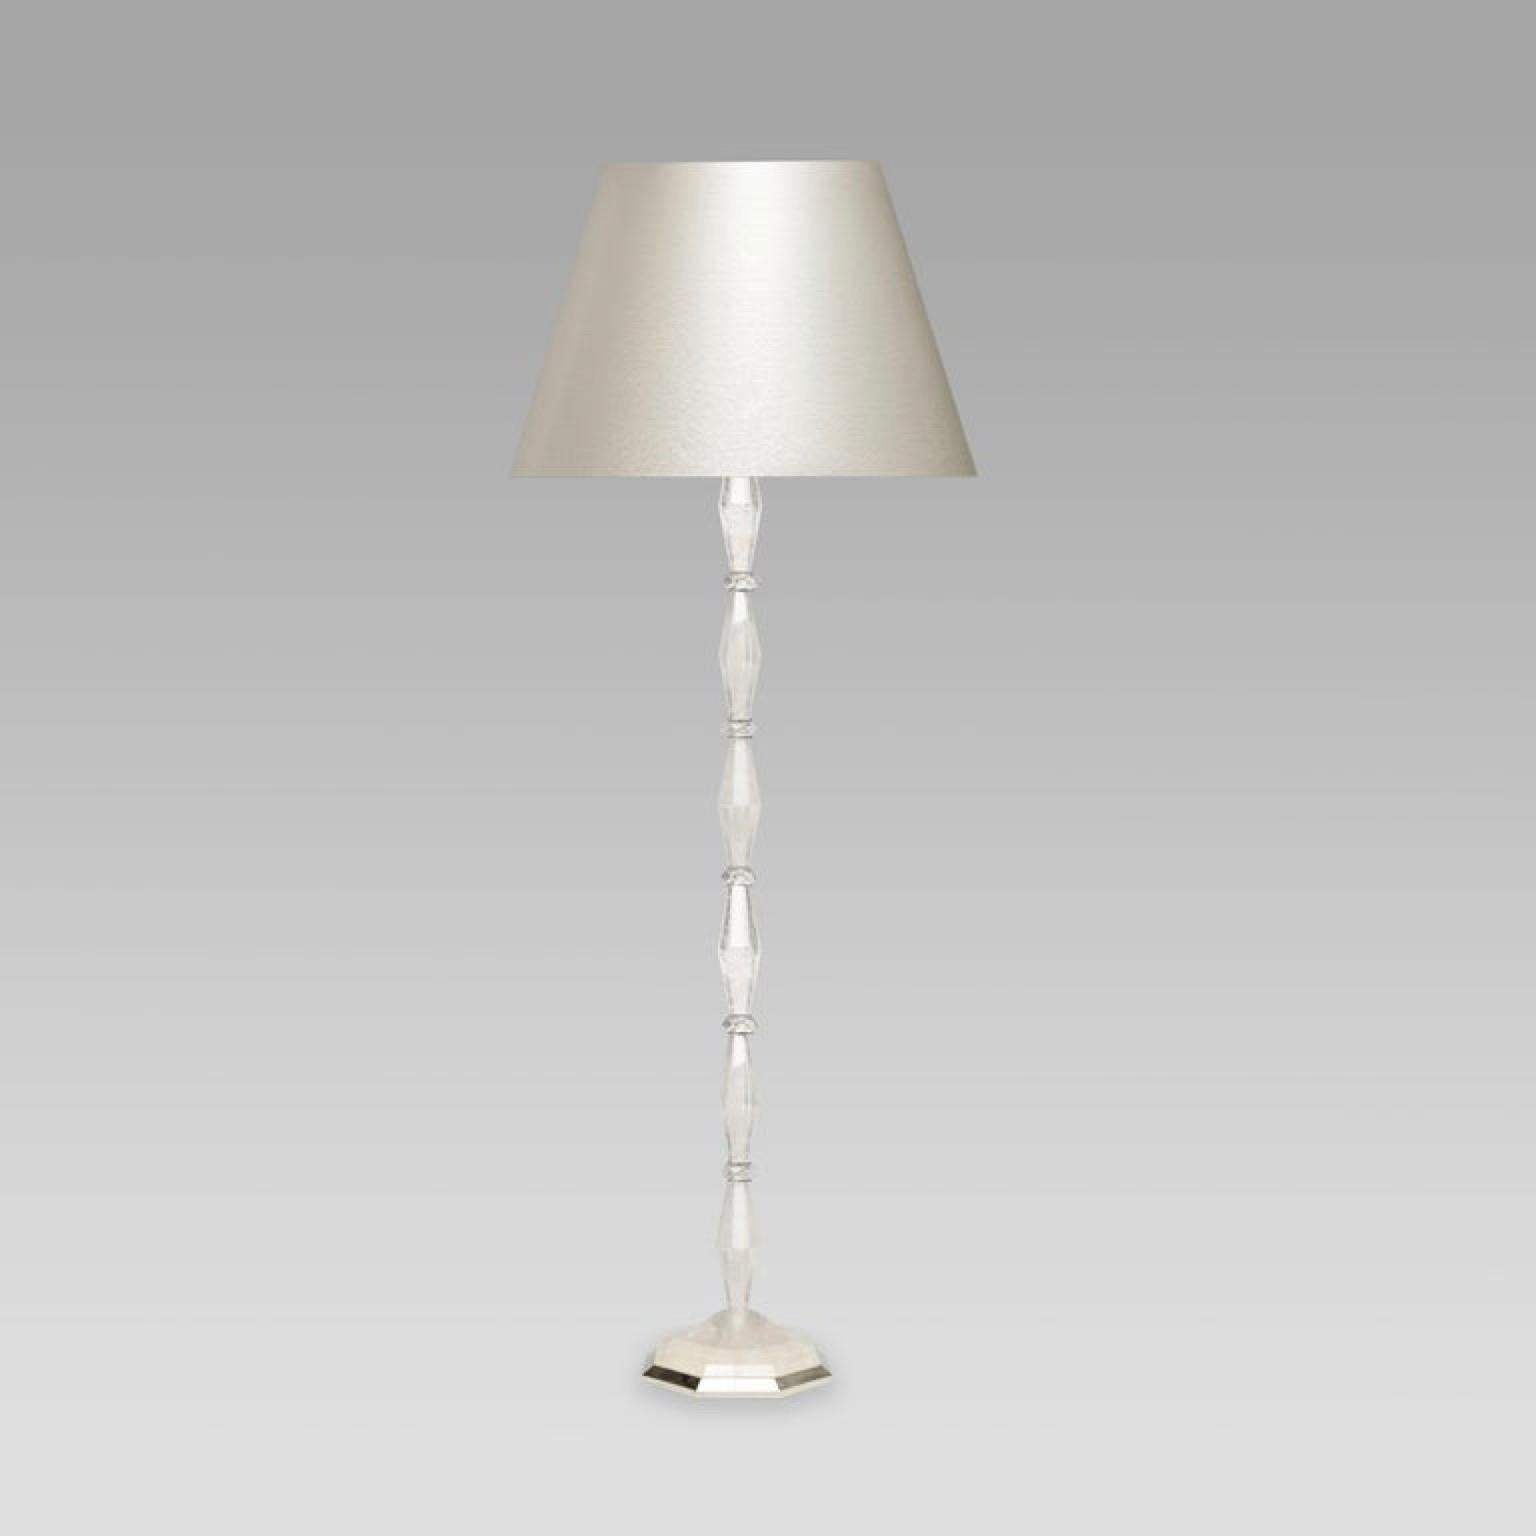 Carved Diamond Form Rock Crystal Quartz Floor Lamp In Excellent Condition For Sale In New York, NY